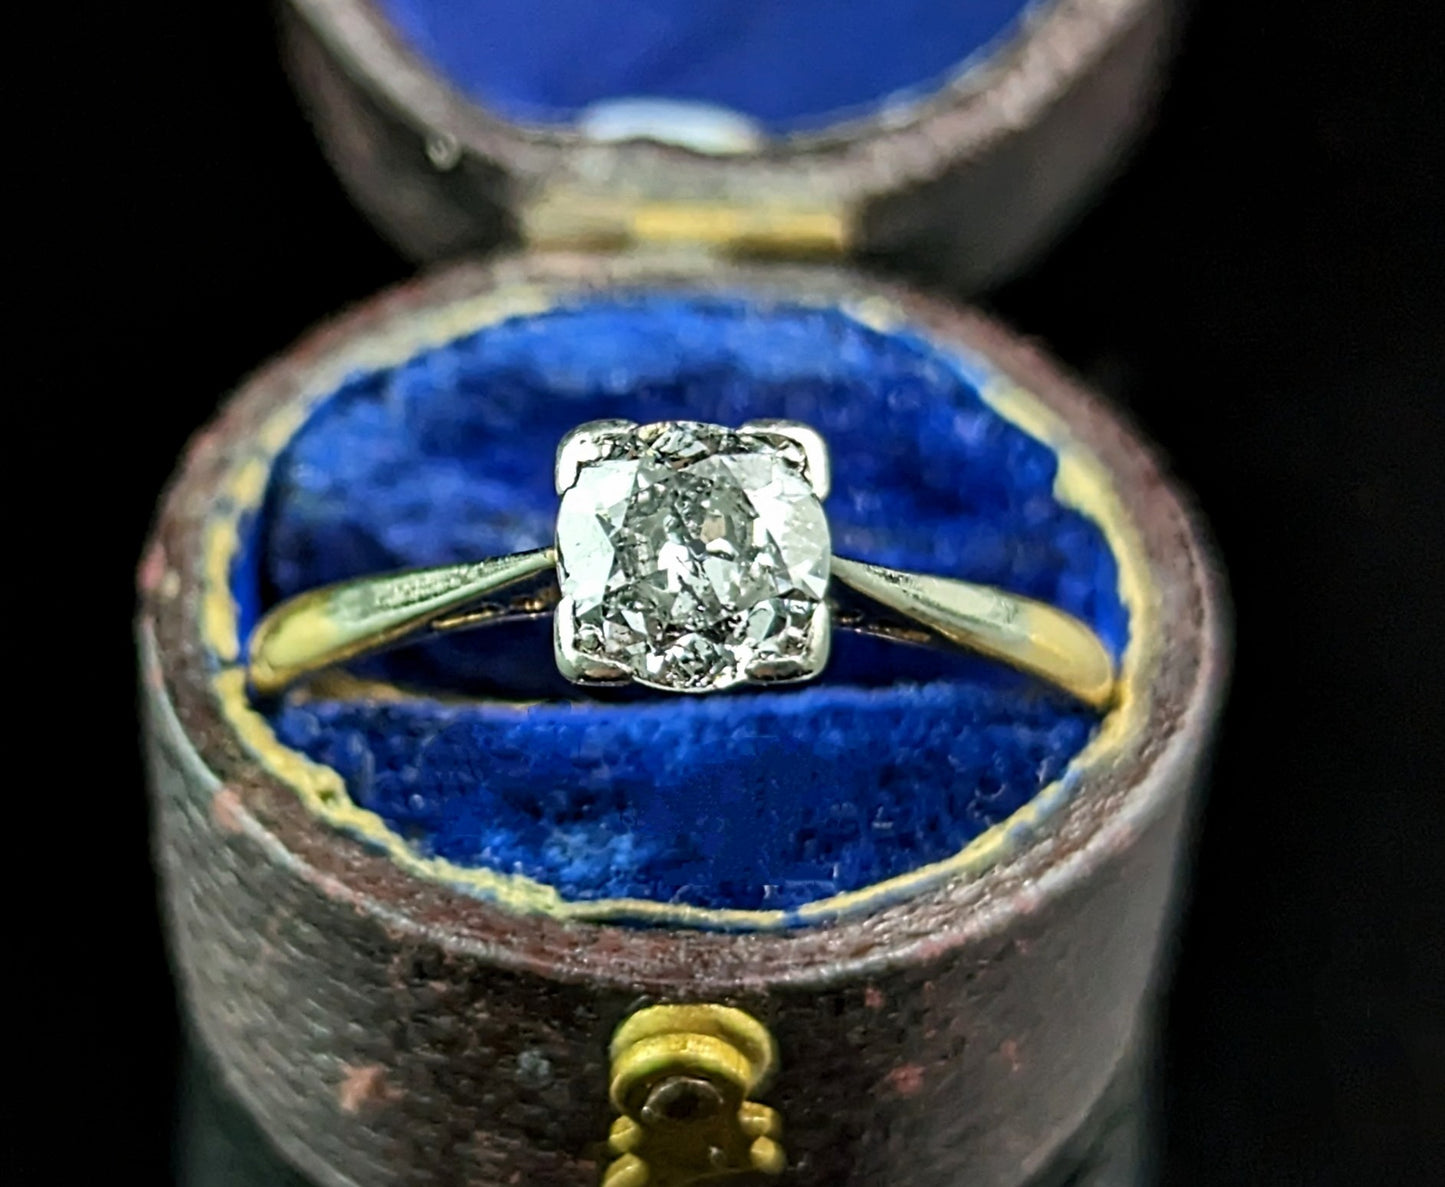 Vintage Art Deco Diamond solitaire ring, 18ct gold and platinum, Engagement ring